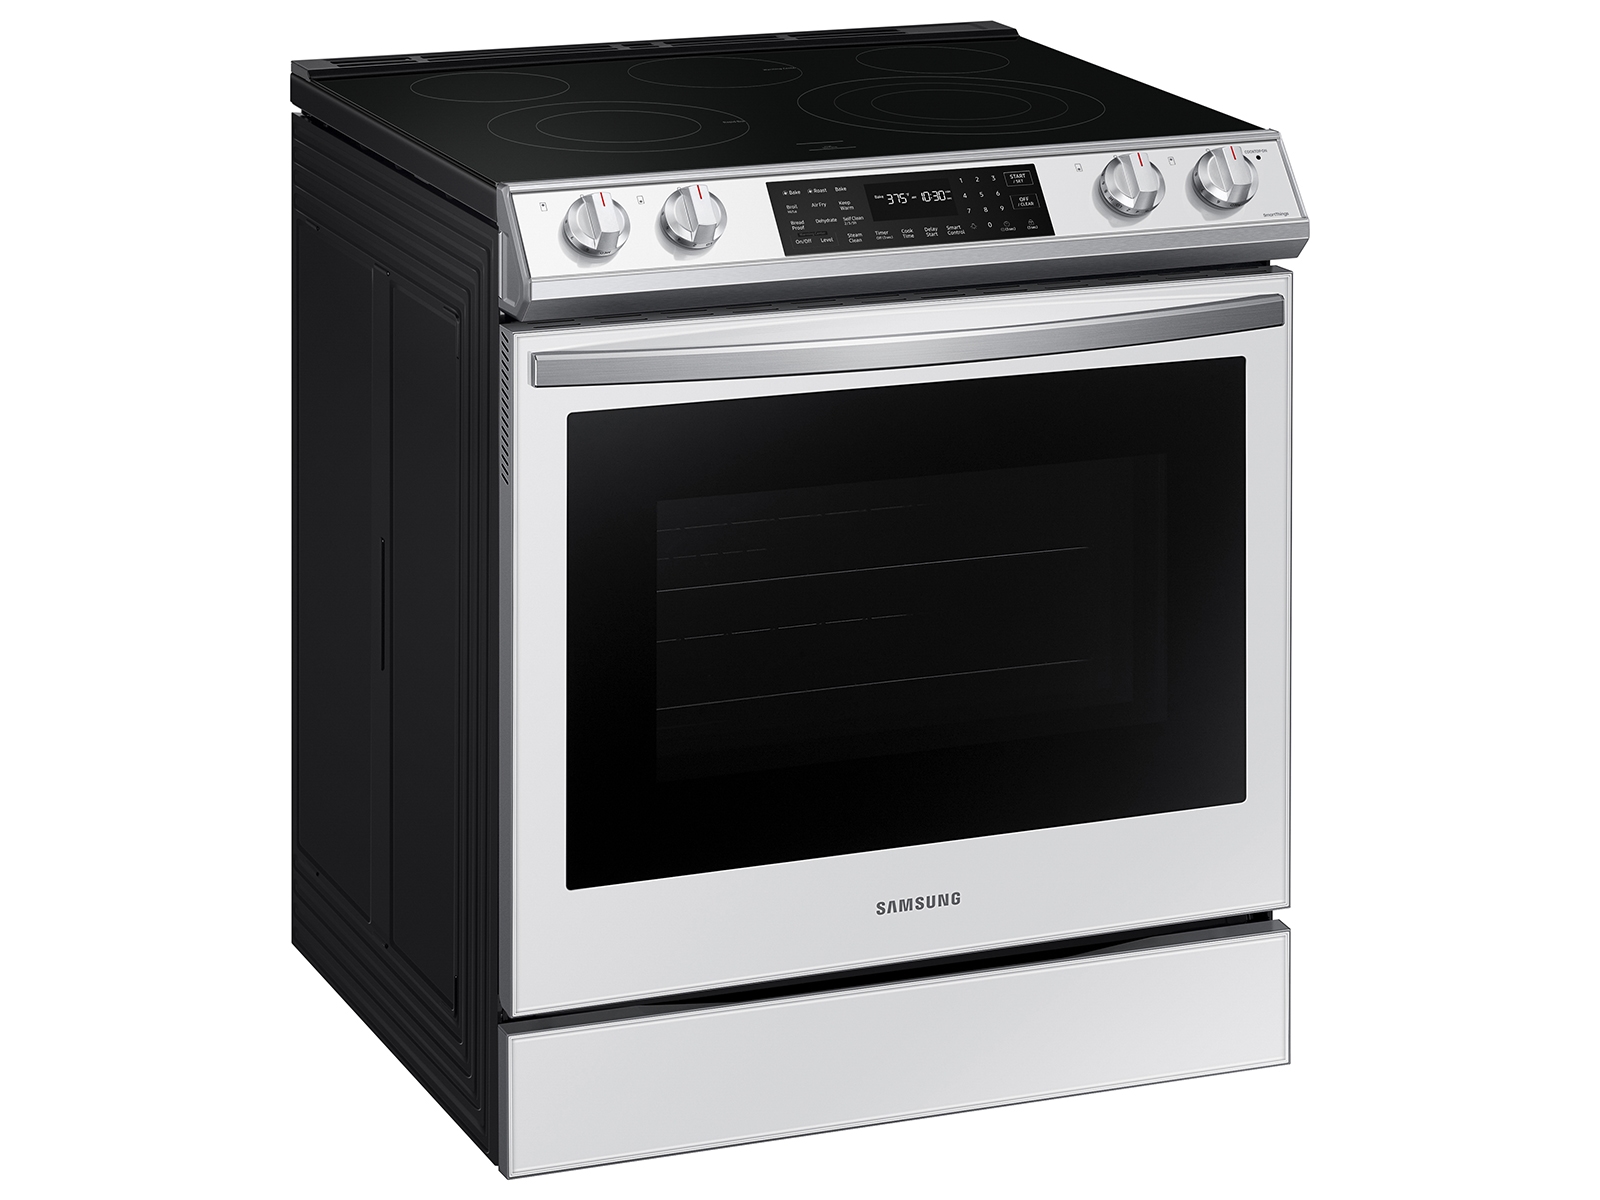 Small - Electric Ranges - Ranges - The Home Depot